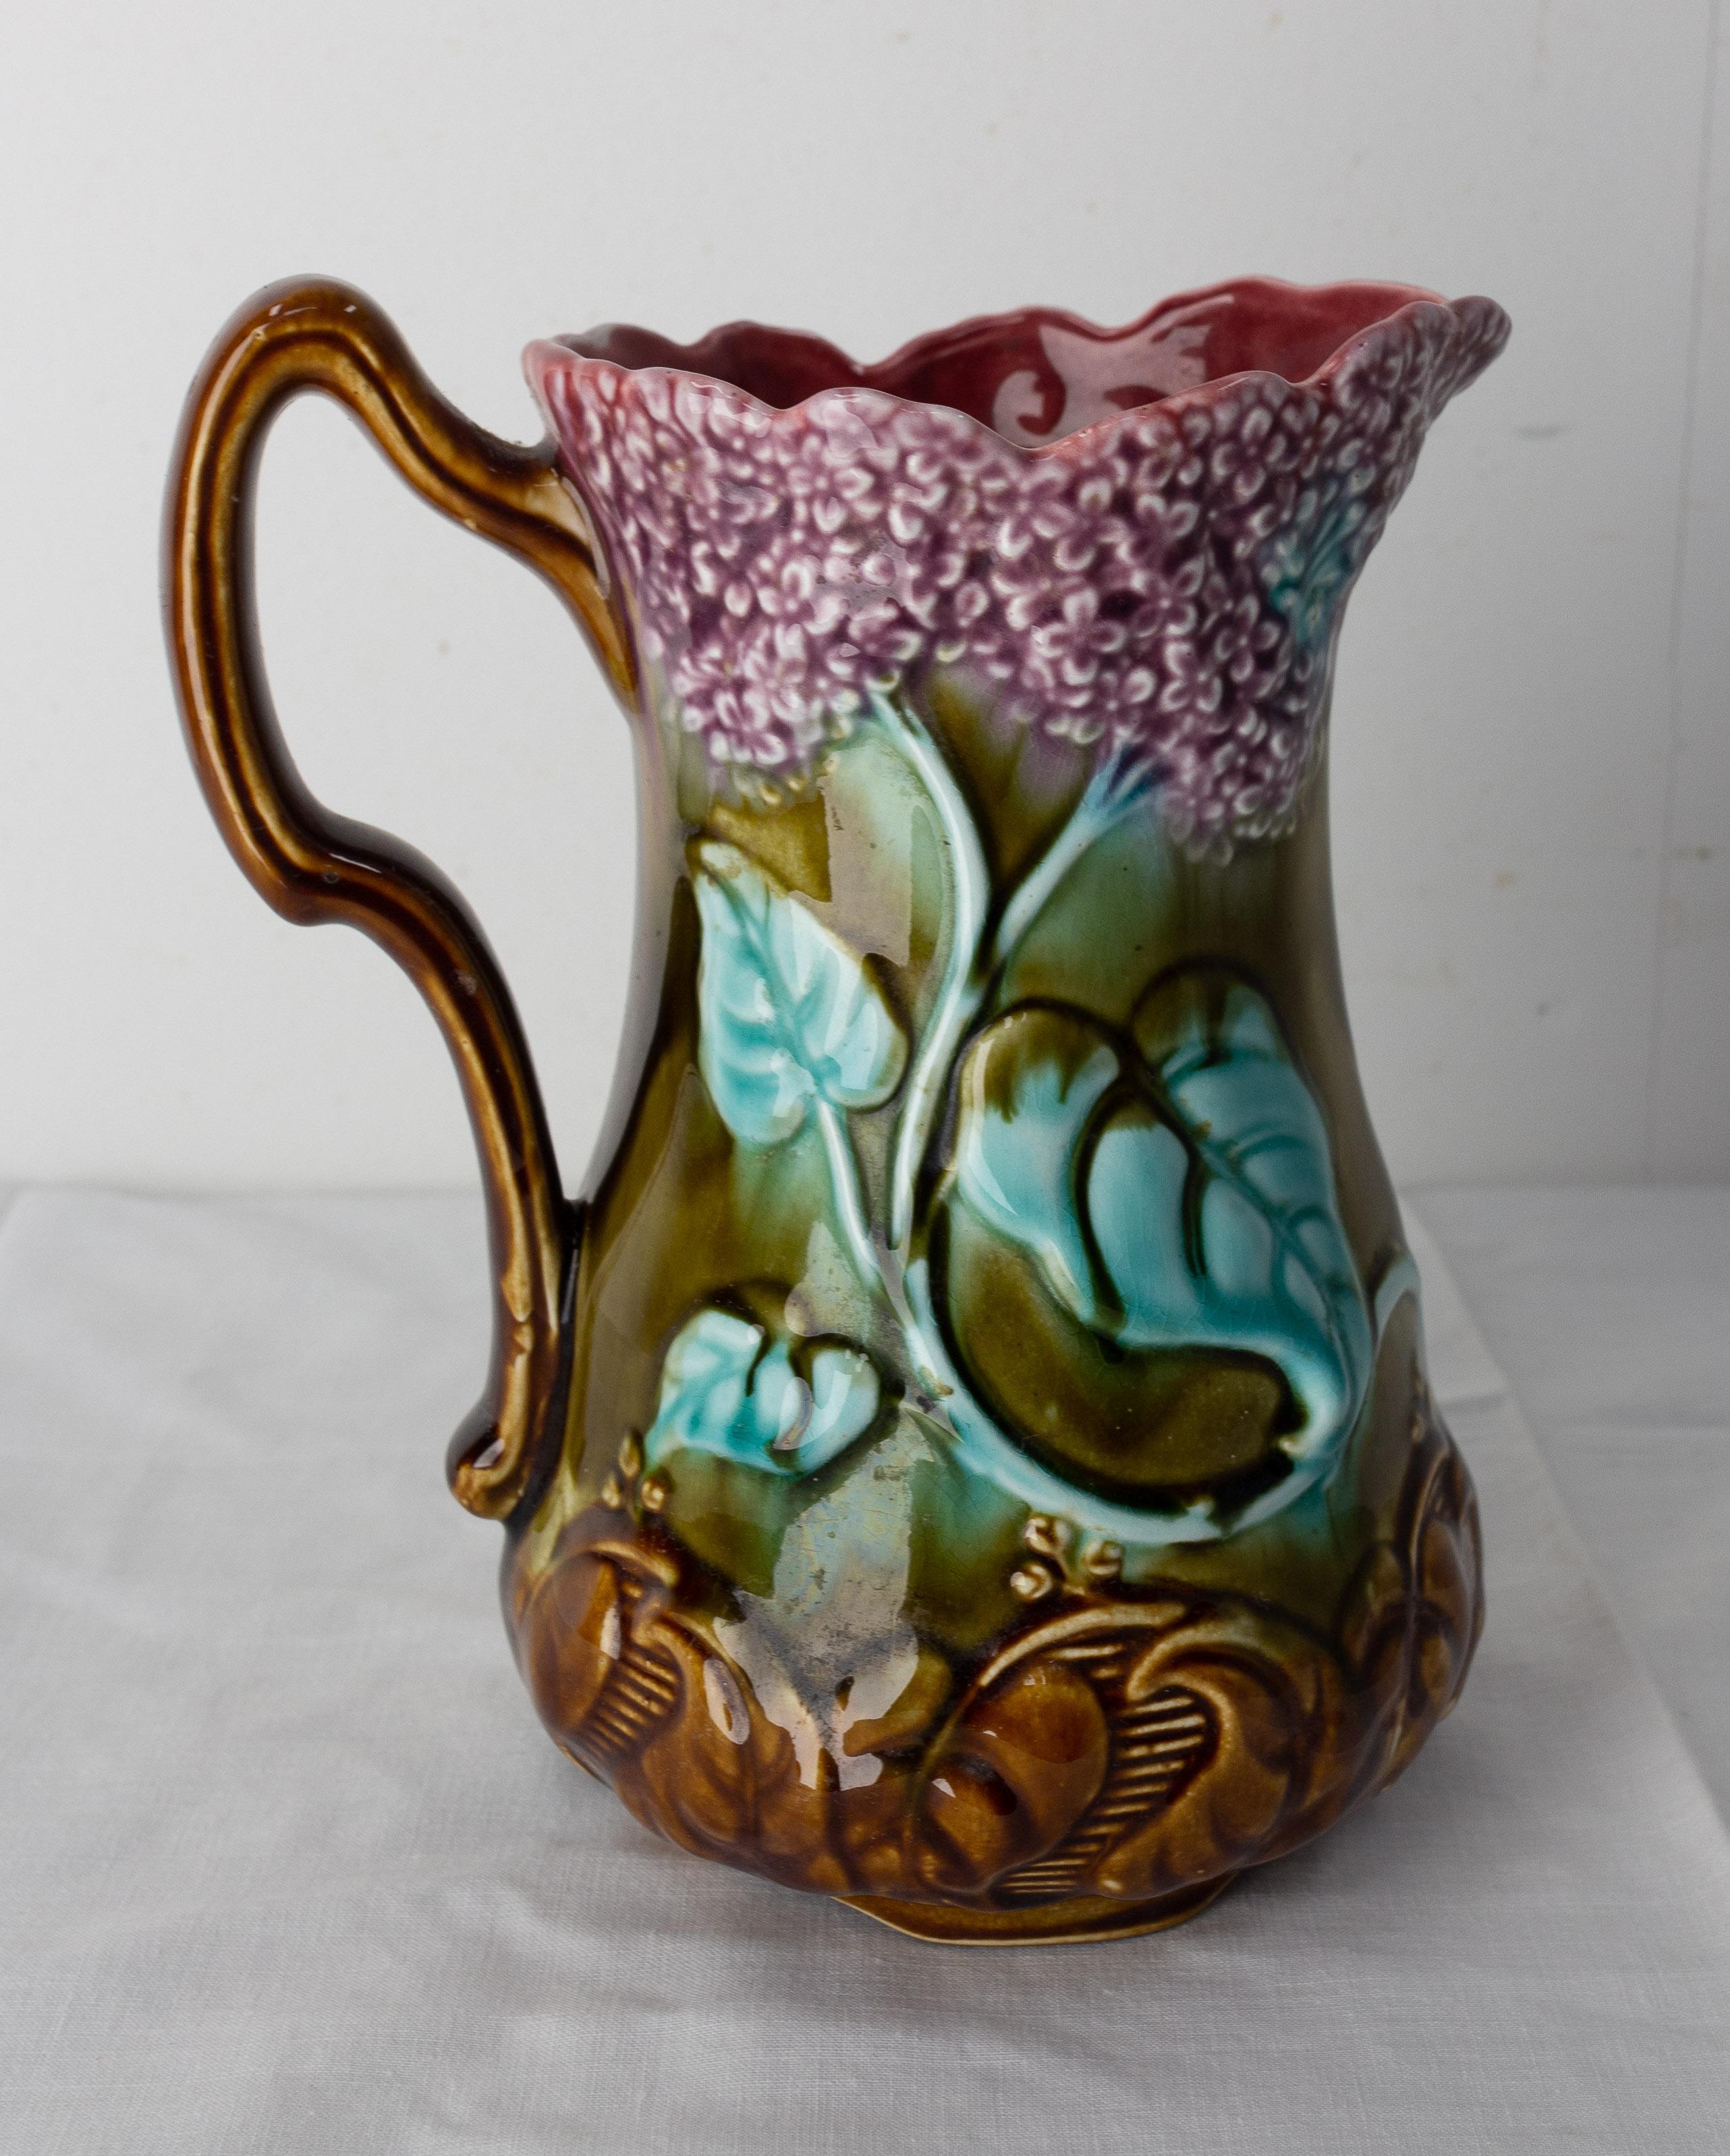 French Pitcher from Onnaing Manufactures, circa 1900.
Art nouveau
Barbotine faience pitcher with two purple lilac branches reprensented
Good condition

Shipping 
L17 P11 H19 0,680 Kg.